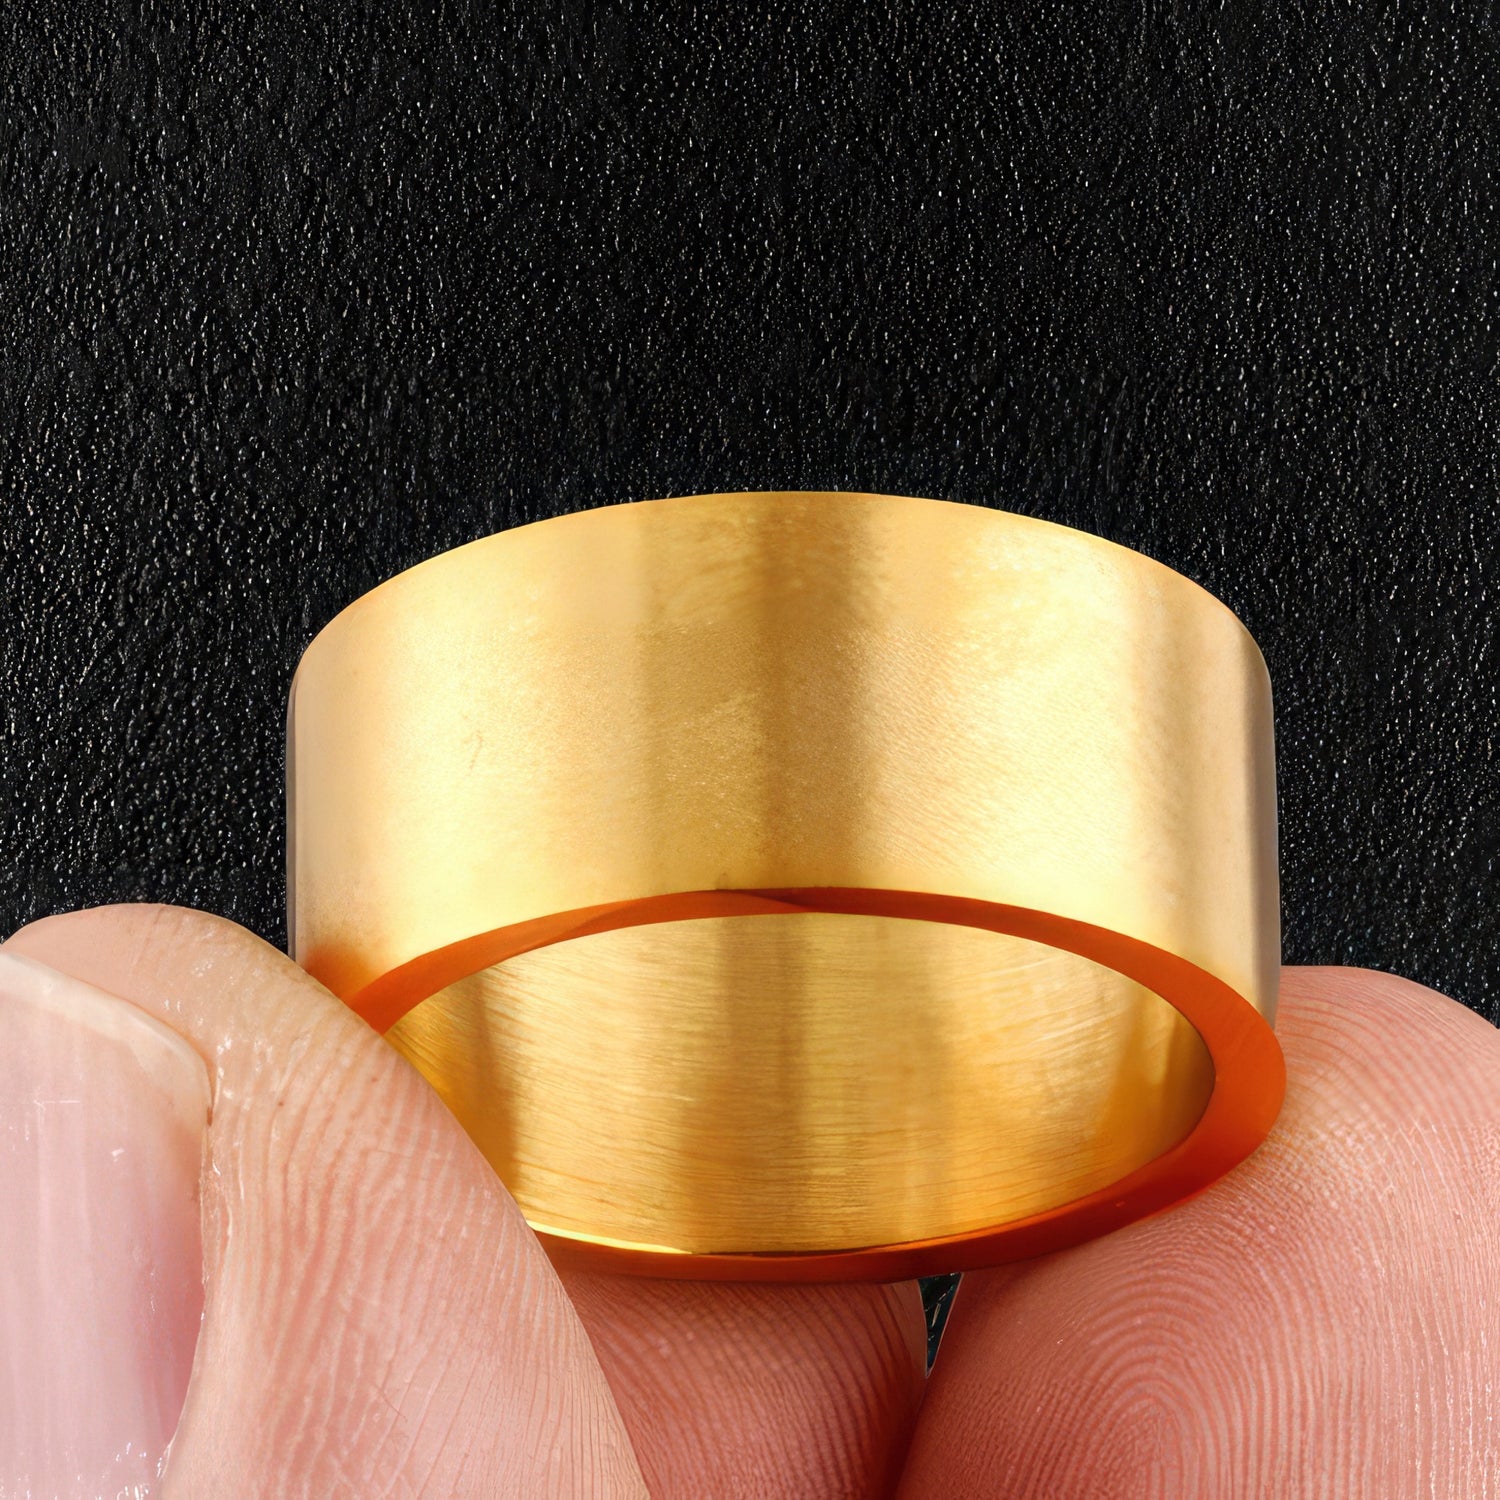 Minimalist Gold Stainless Steel Ring